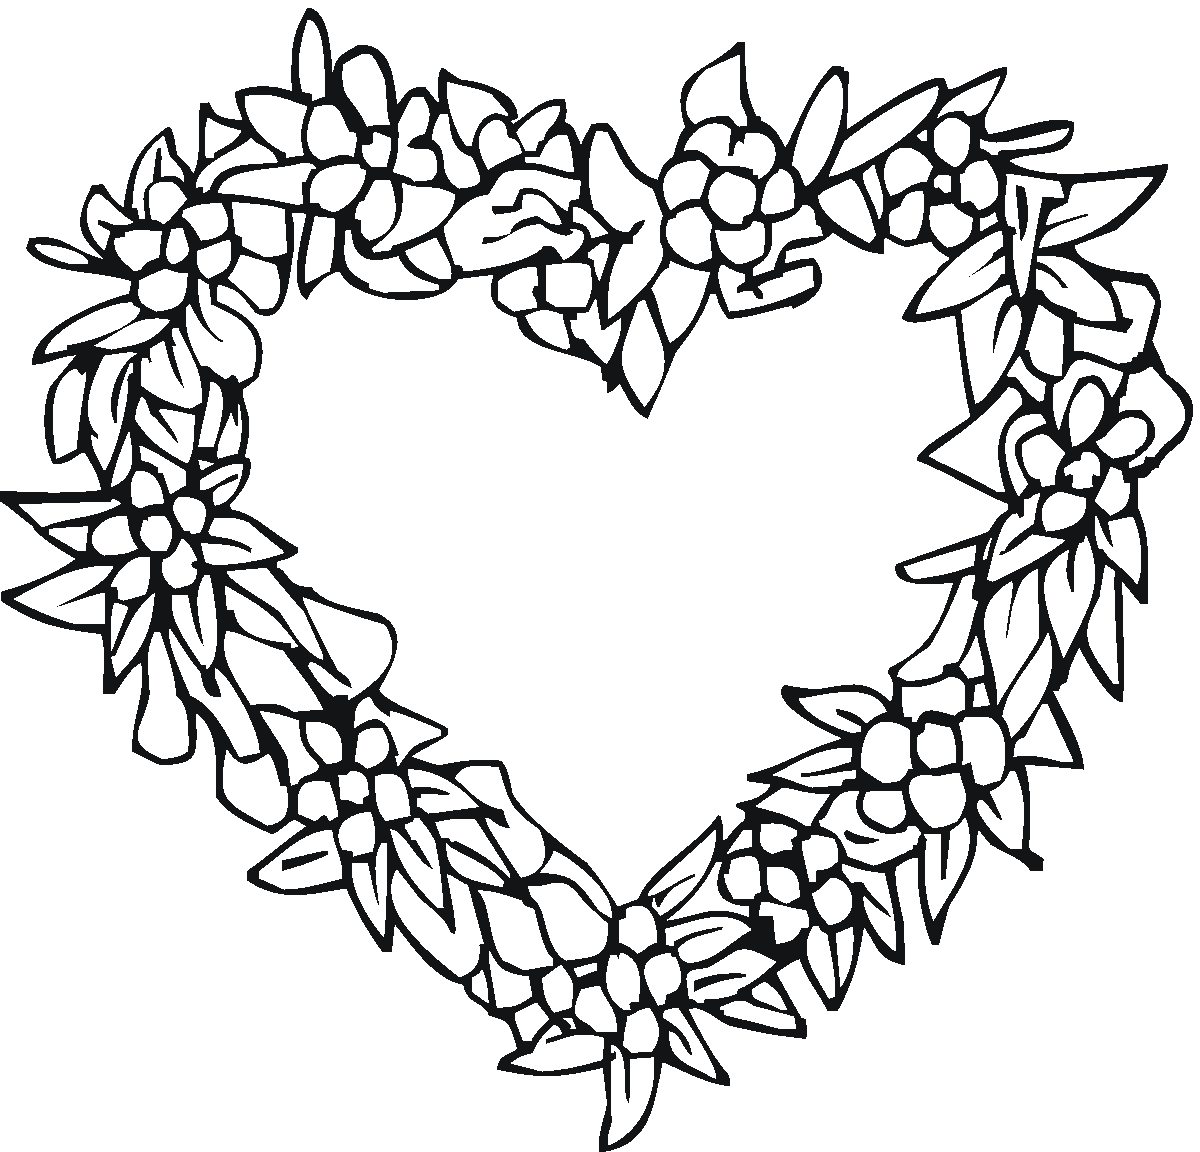 free coloring pages flowers hearts preschool coloring sheets flowers collection coloring pages free hearts pages flowers coloring 